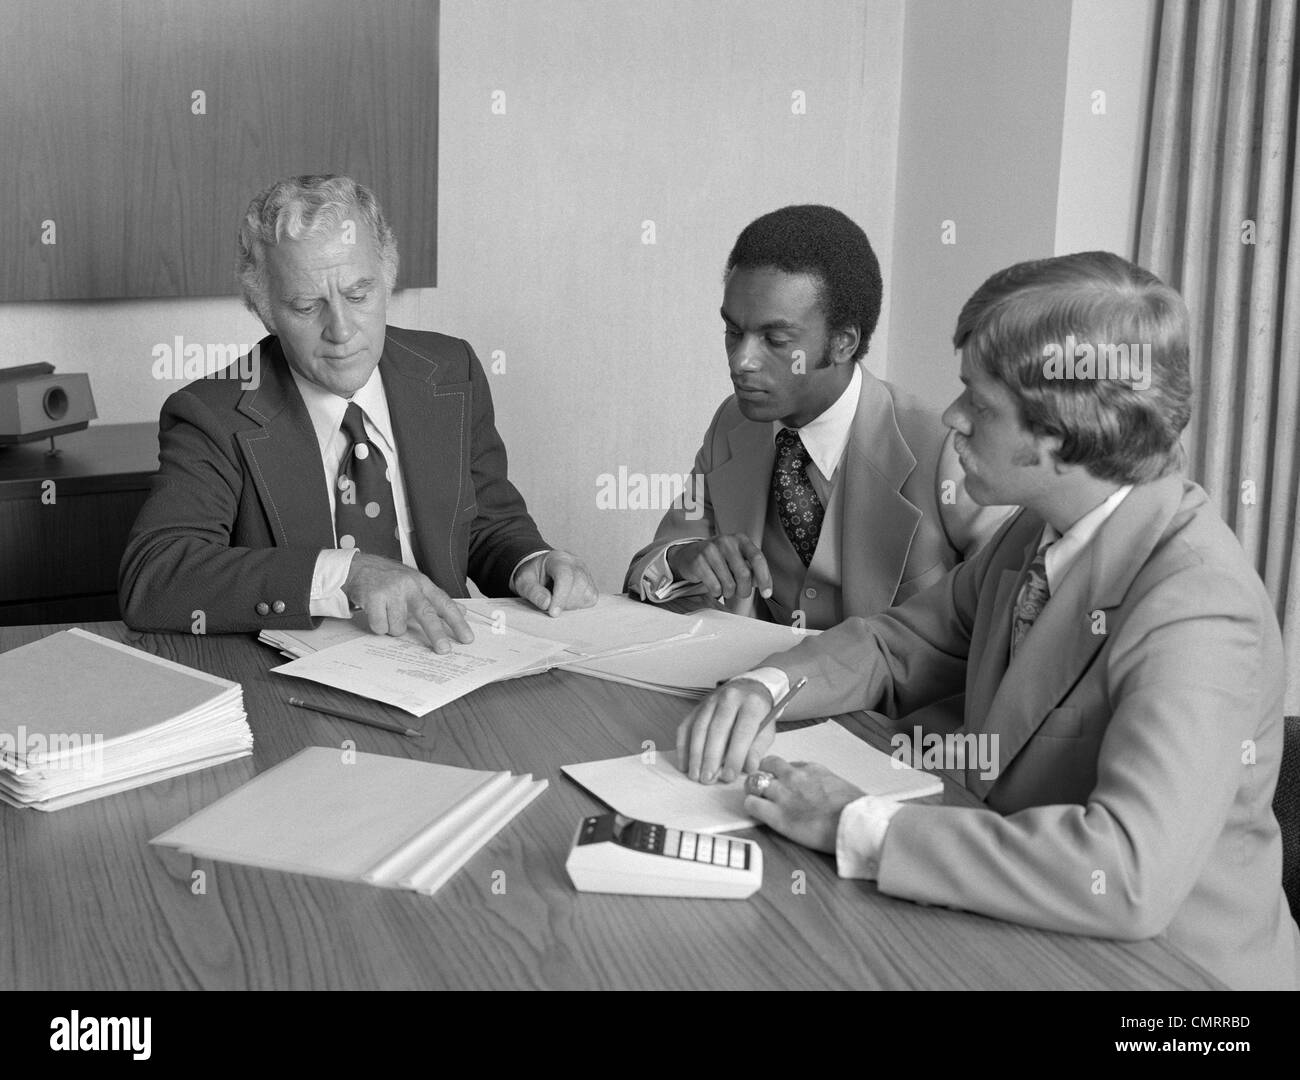 1970s 3 MEN CAUCASIAN & AFRICAN-AMERICAN BUSINESS MEETING AT CONFERENCE TABLE Stock Photo